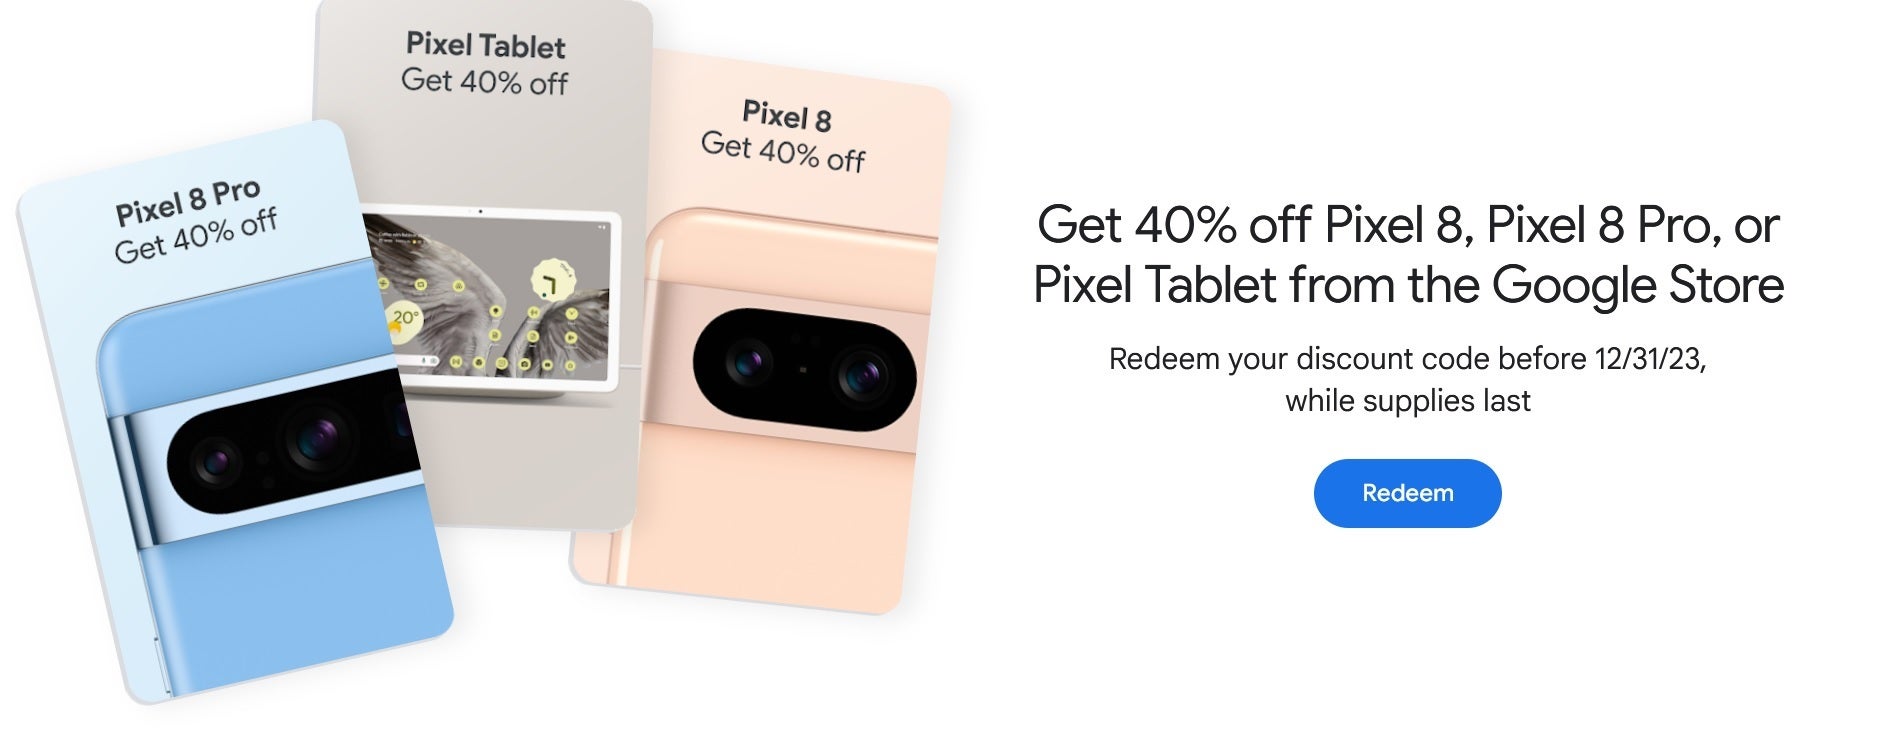 You can save 40% on the Pixel 8, Pixel 8 Pro, or Pixel Tablet by being a Gold, Platinum, or Diamond member of Google Play Points - Google Play Points Gold members and above can get 40% off the Pixel 8 series and Pixel tablet